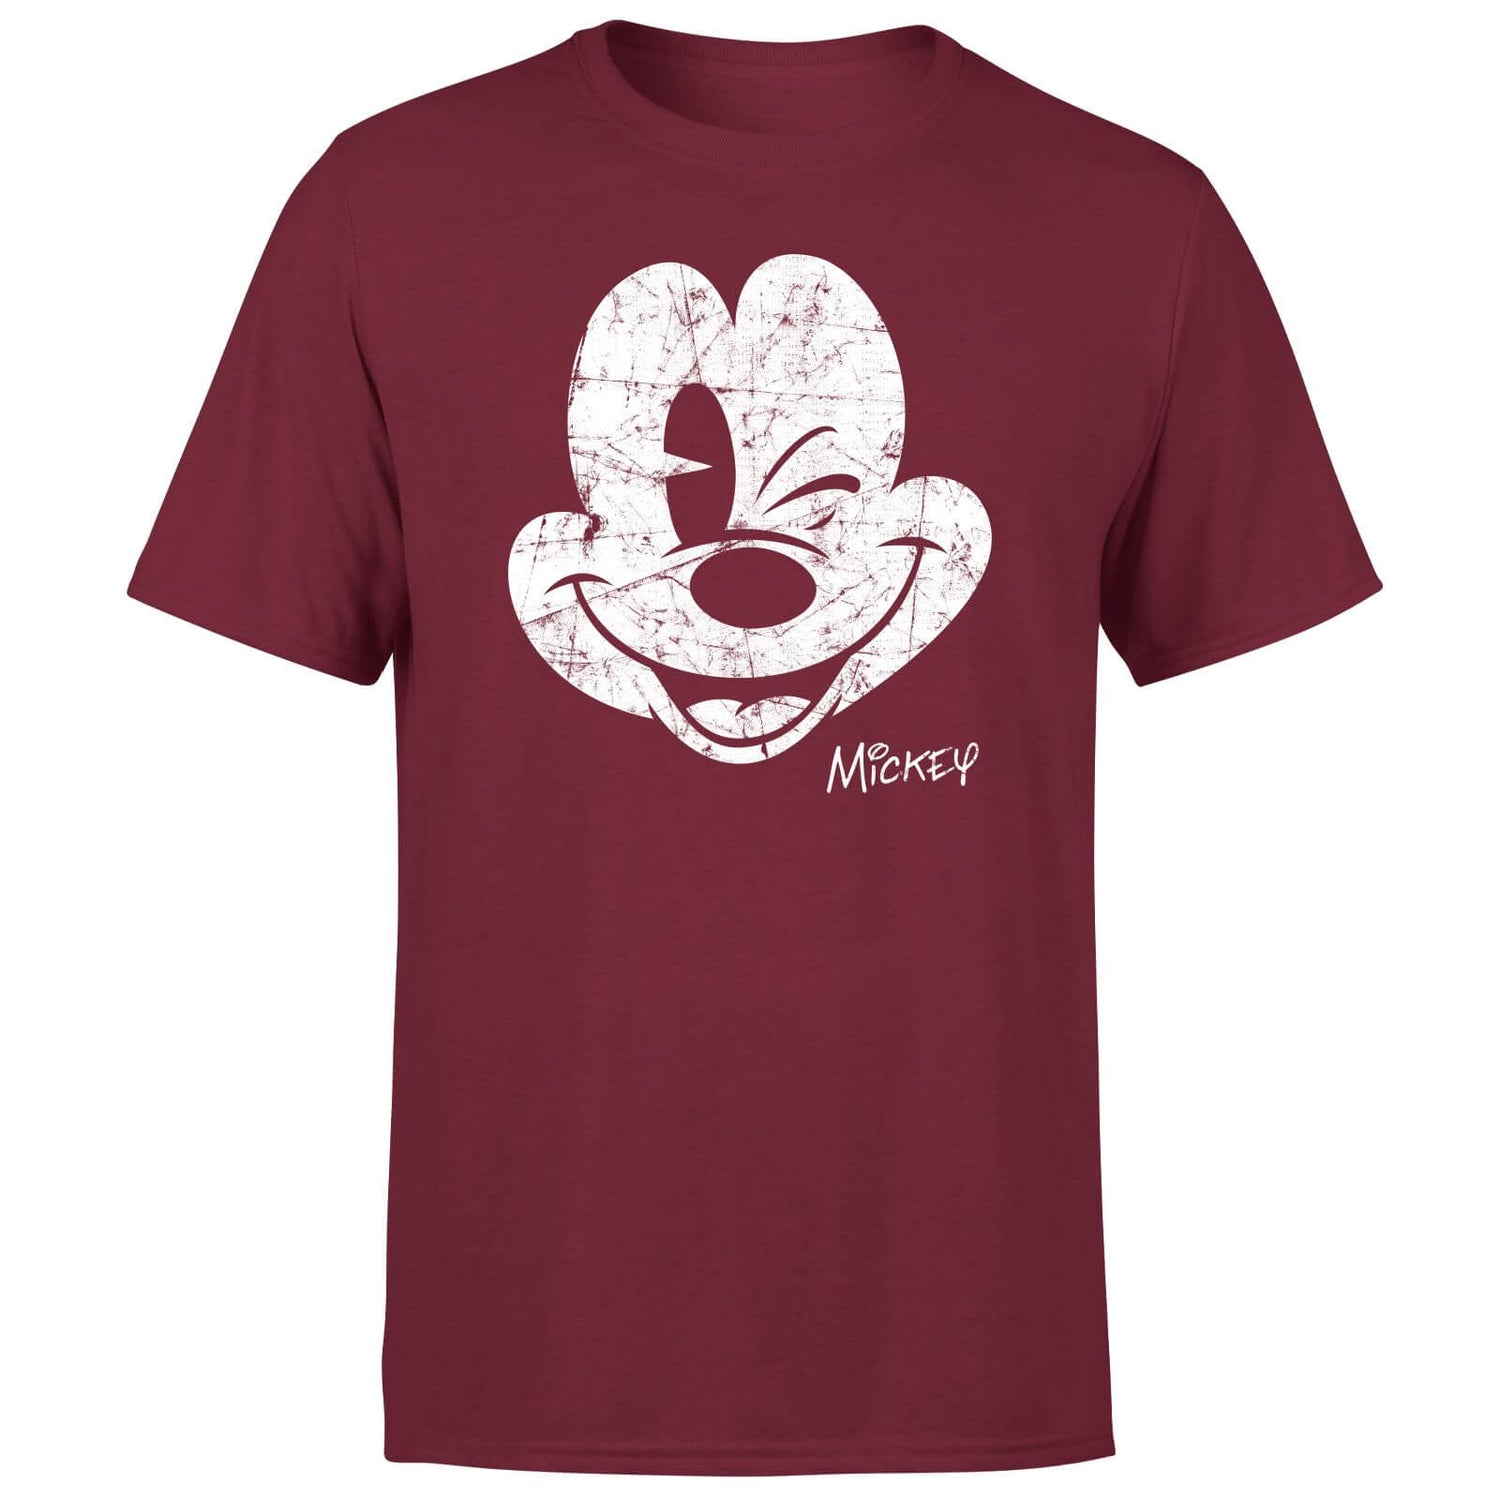 Mickey Mouse Worn Face Men's T-Shirt - Burgundy